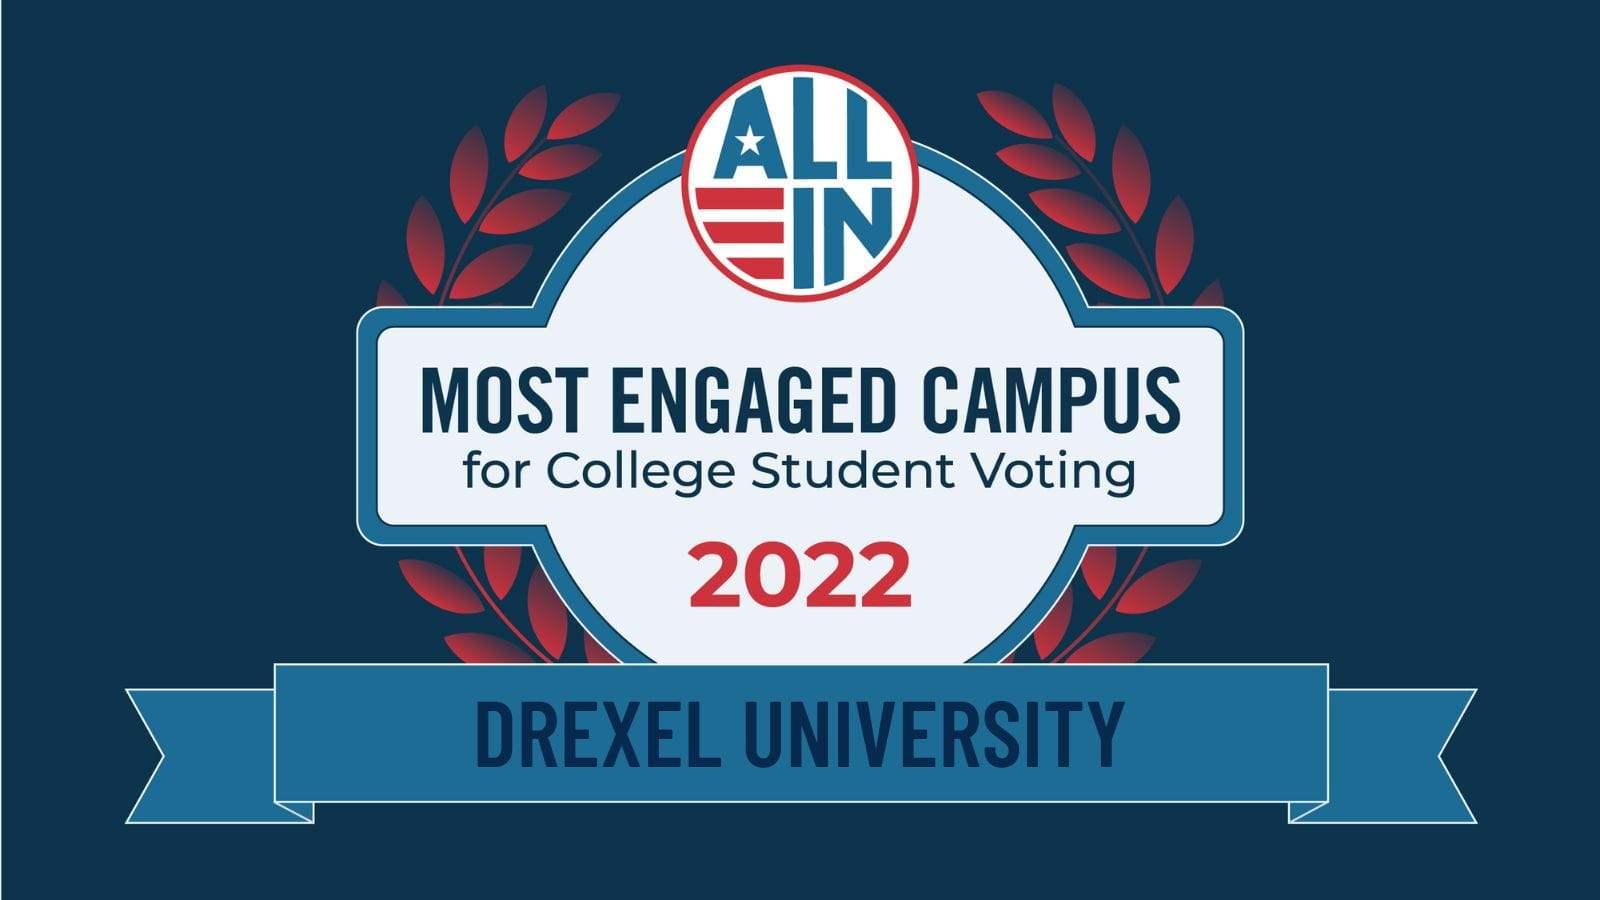 All in: Most Engaged Campus for College Student Voting 2022